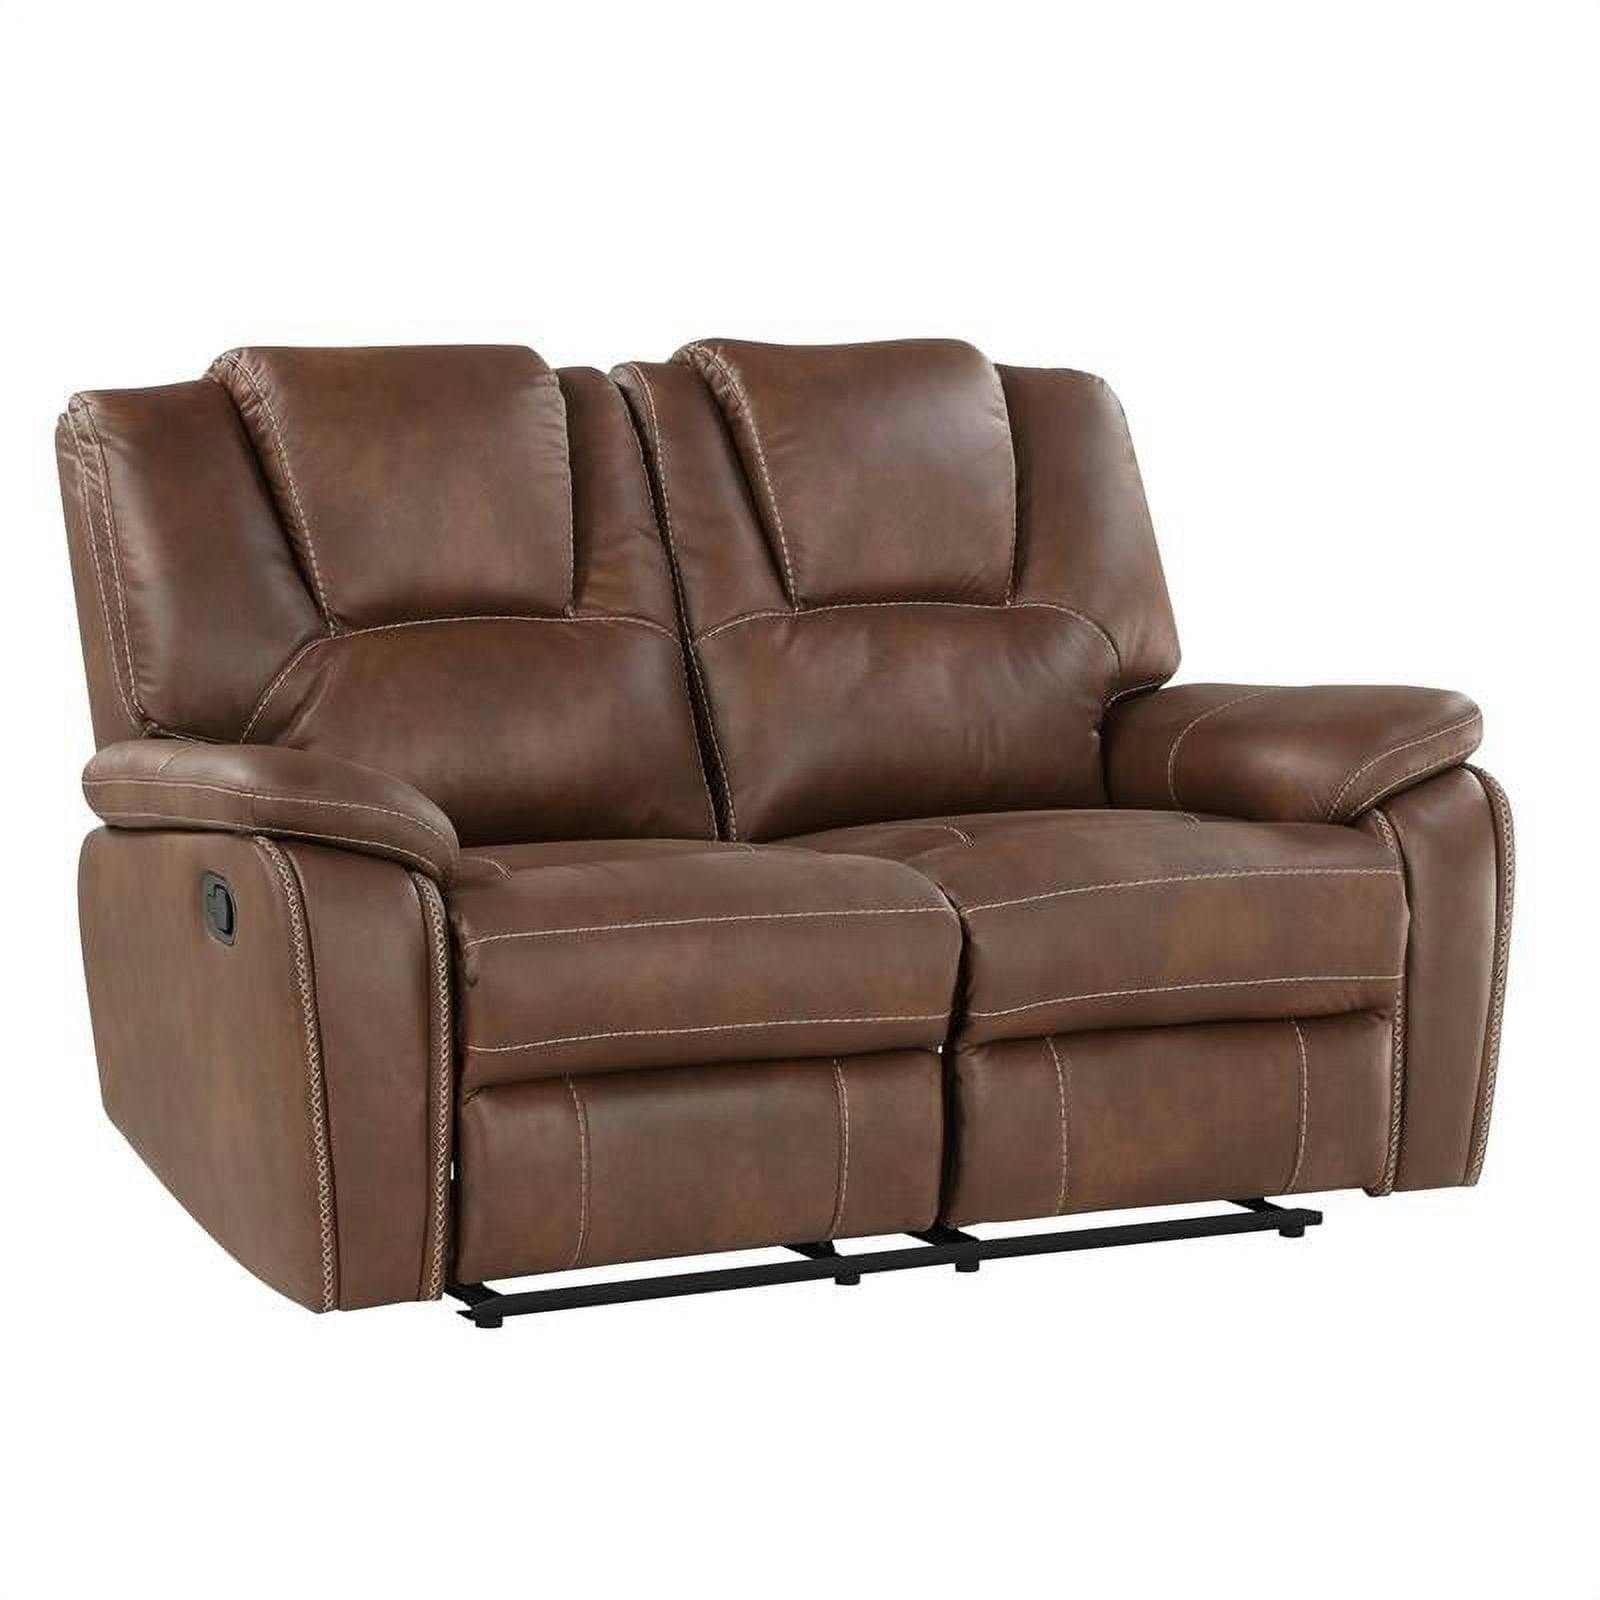 Chestnut Brown Faux Leather 62'' Reclining Loveseat with Pillow-Top Arms